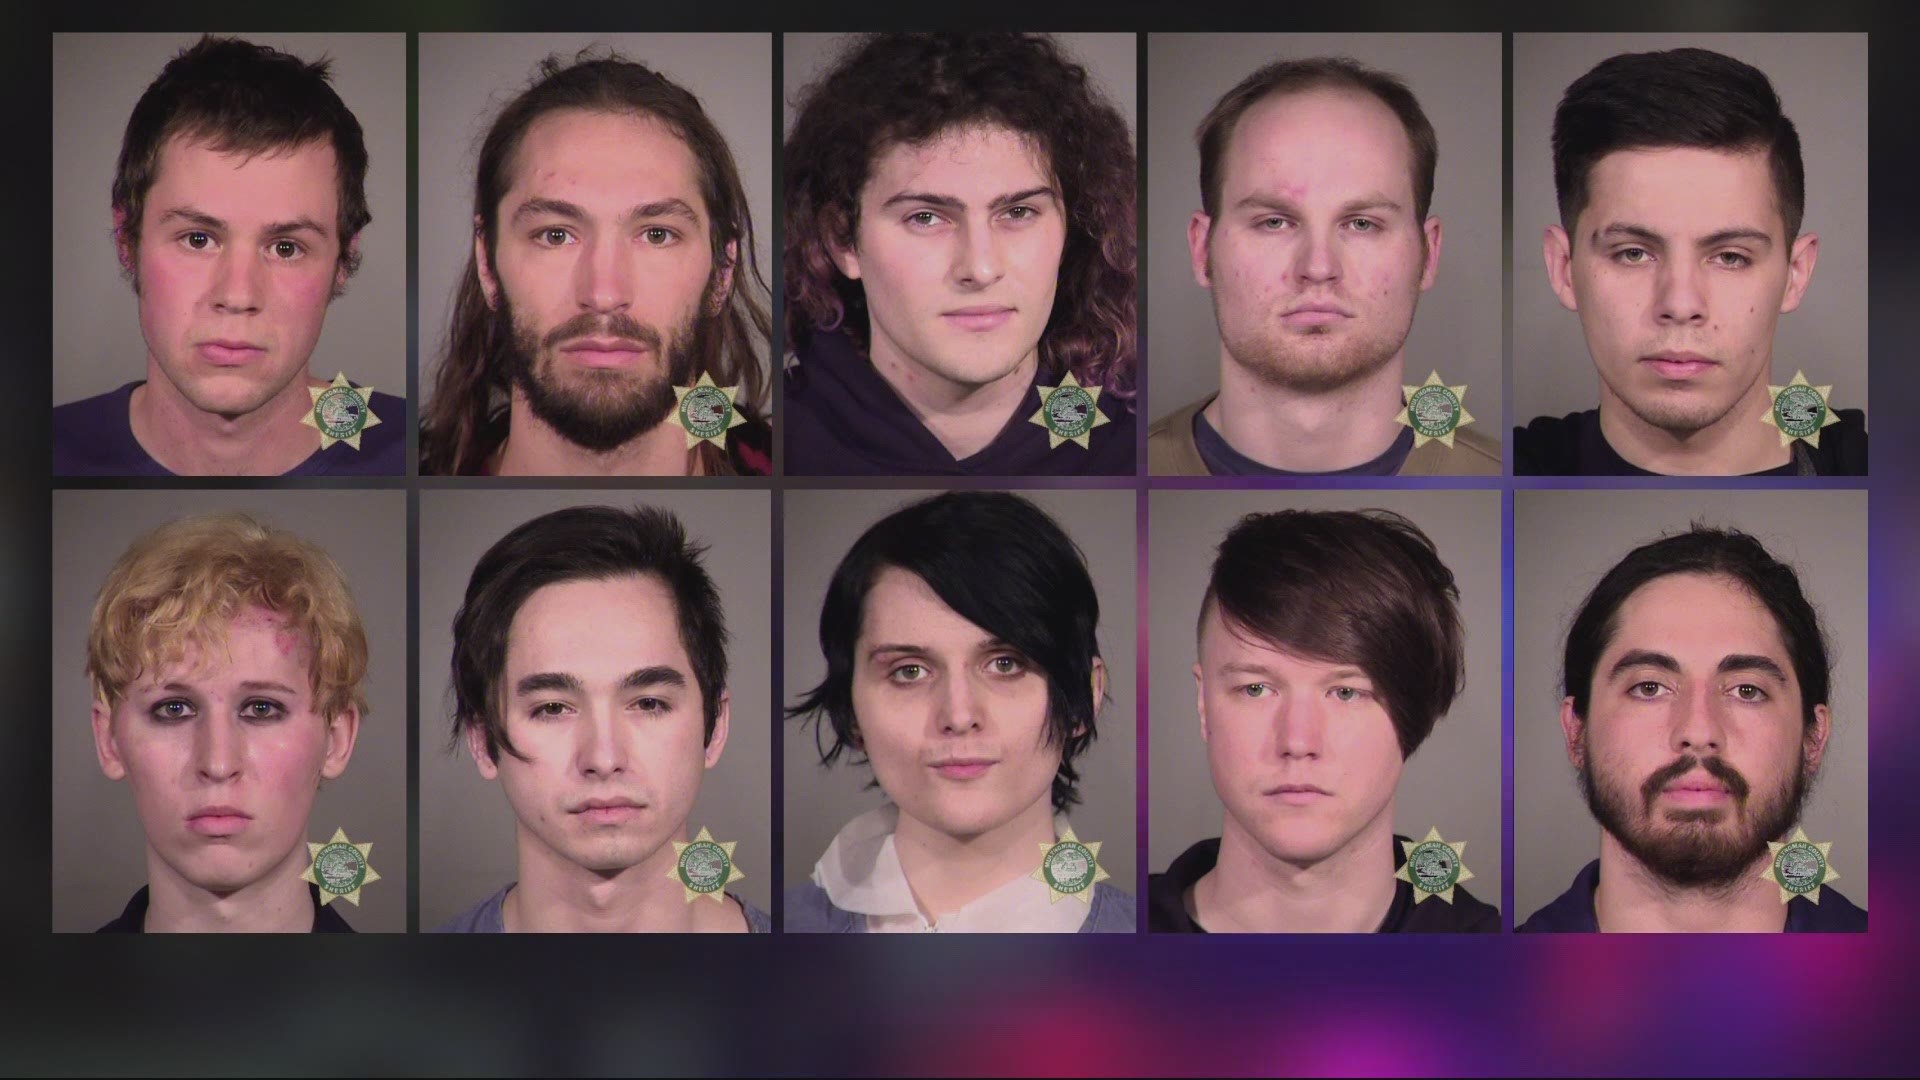 The district attorney is charging 10 people accused of participating in violence protests and riots in Portland. Kyle Iboshi reports.